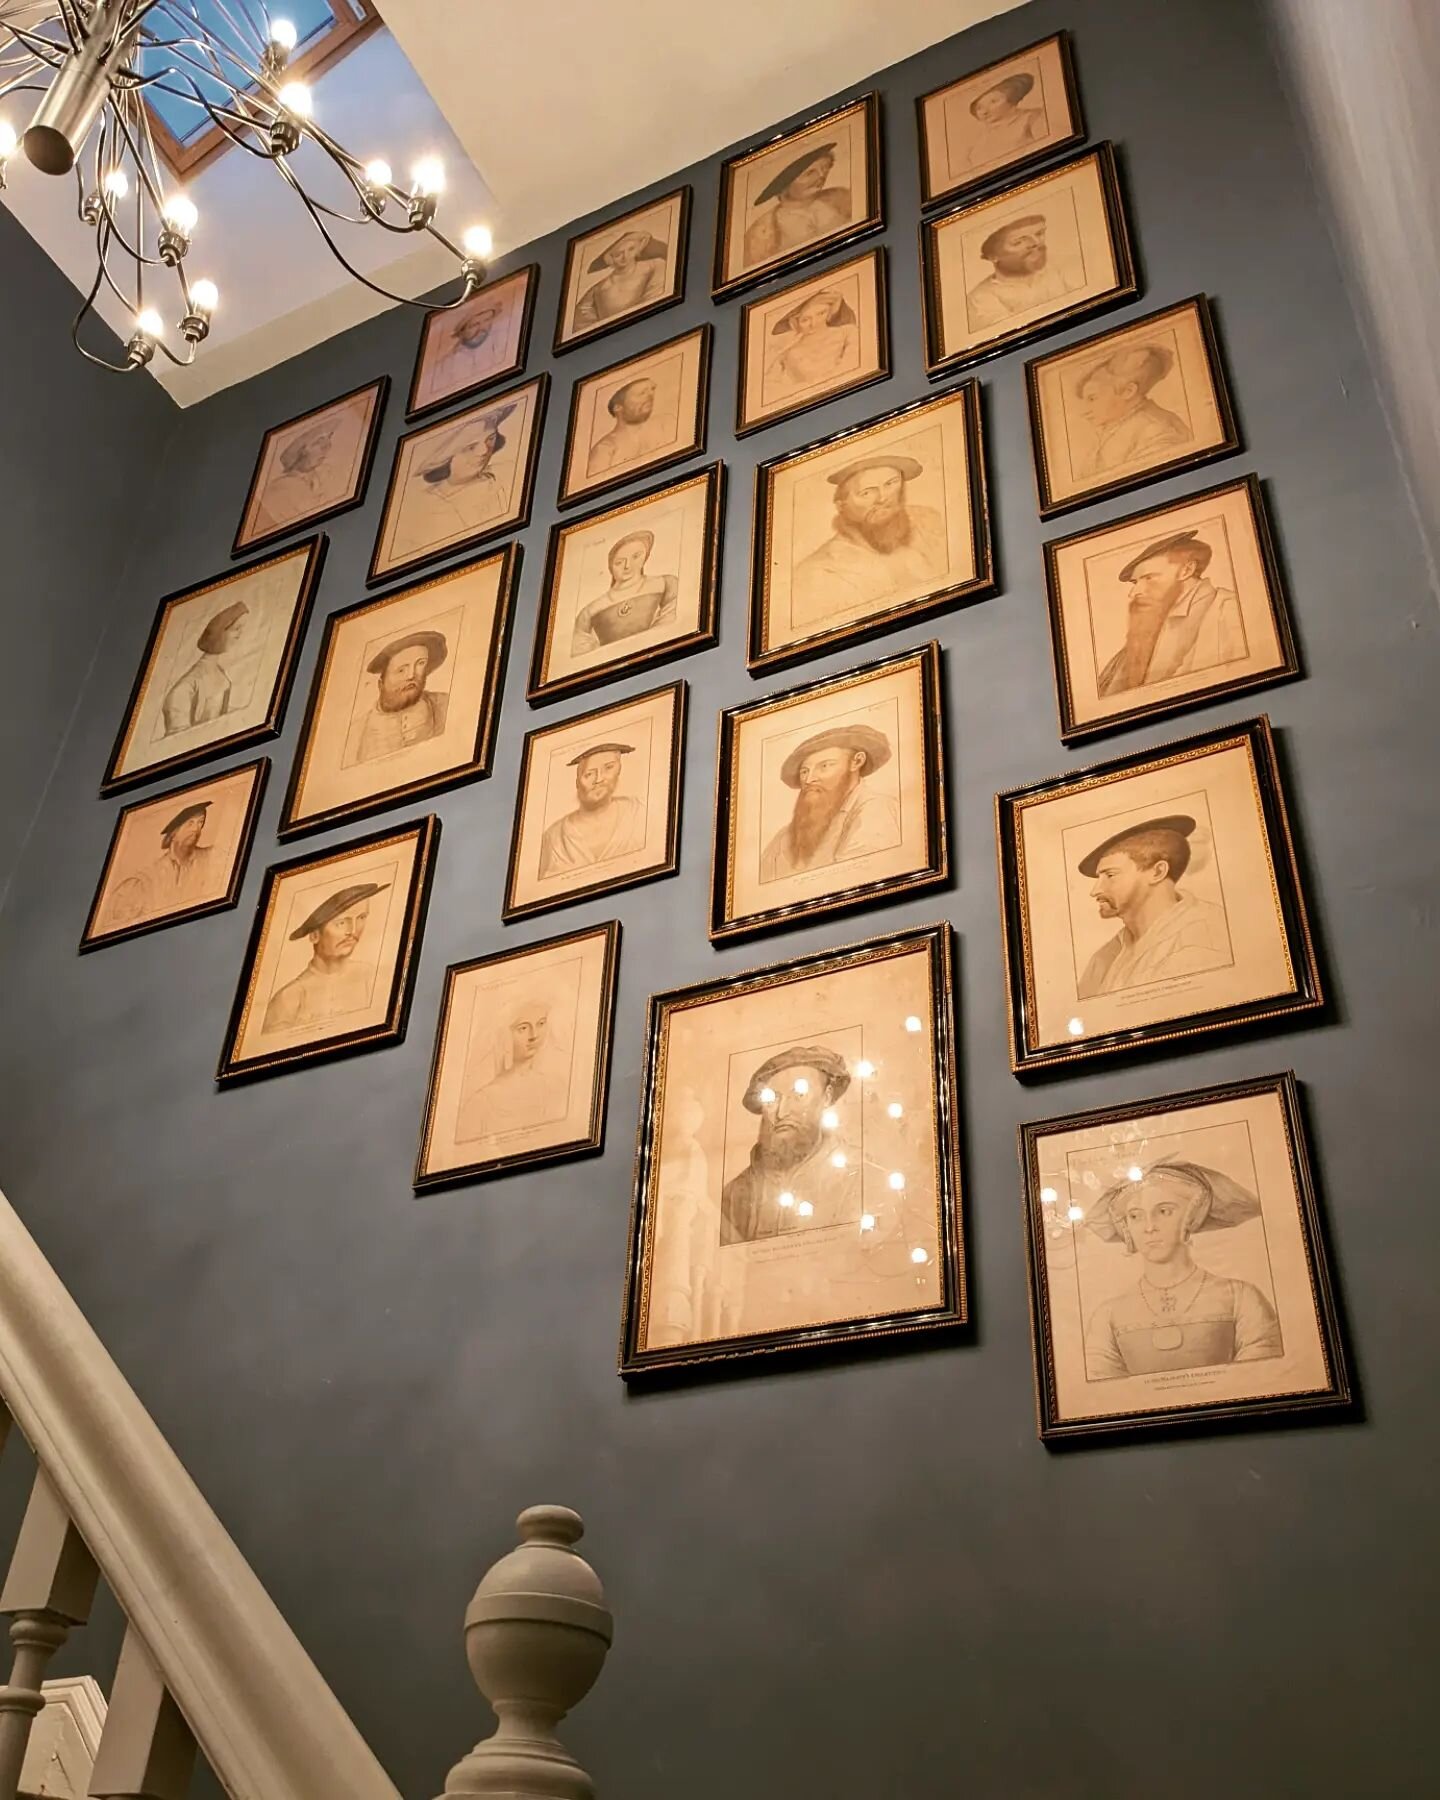 A collection of etchings from around the 1790's by Francesco Bartolozzi. These etchings were reproductions of 16th century drawings by Hans Holbein. 

When working with a high proportion of works in portrait for a stairwell grouping try to avoid foll